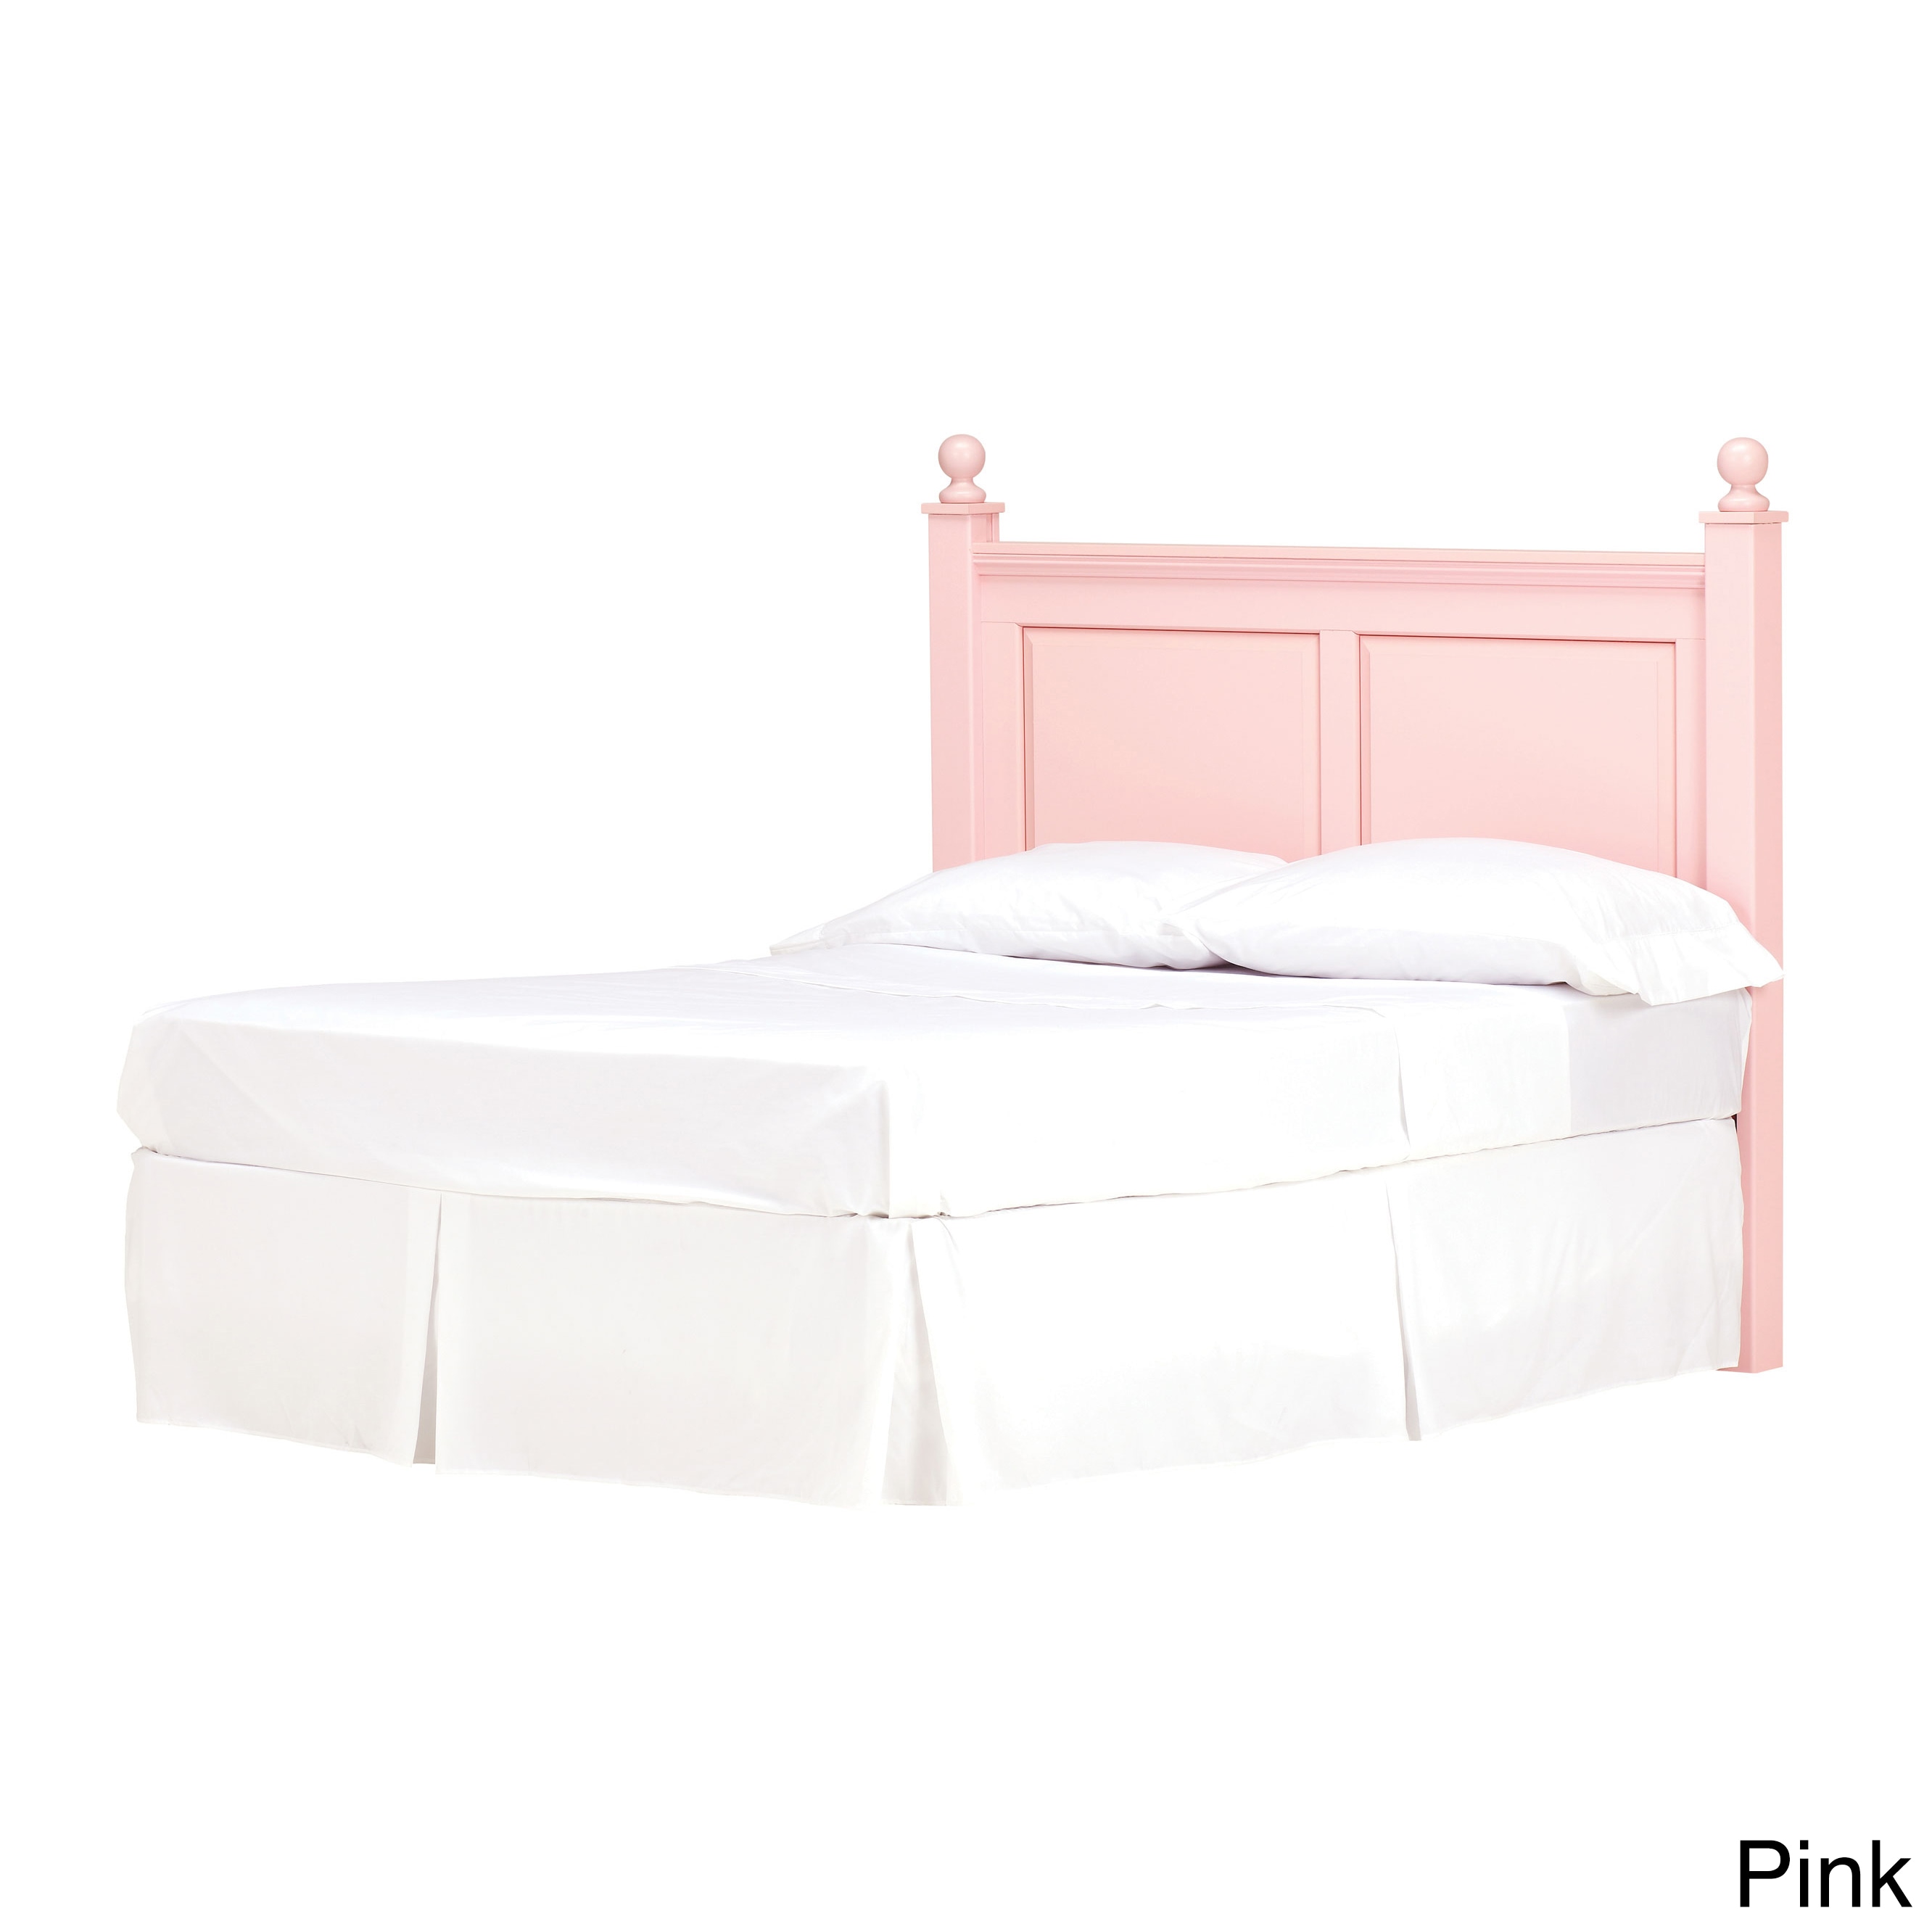 Lang Furniture Raised Panel Full Size Four Poster Headboard Pink Size Full